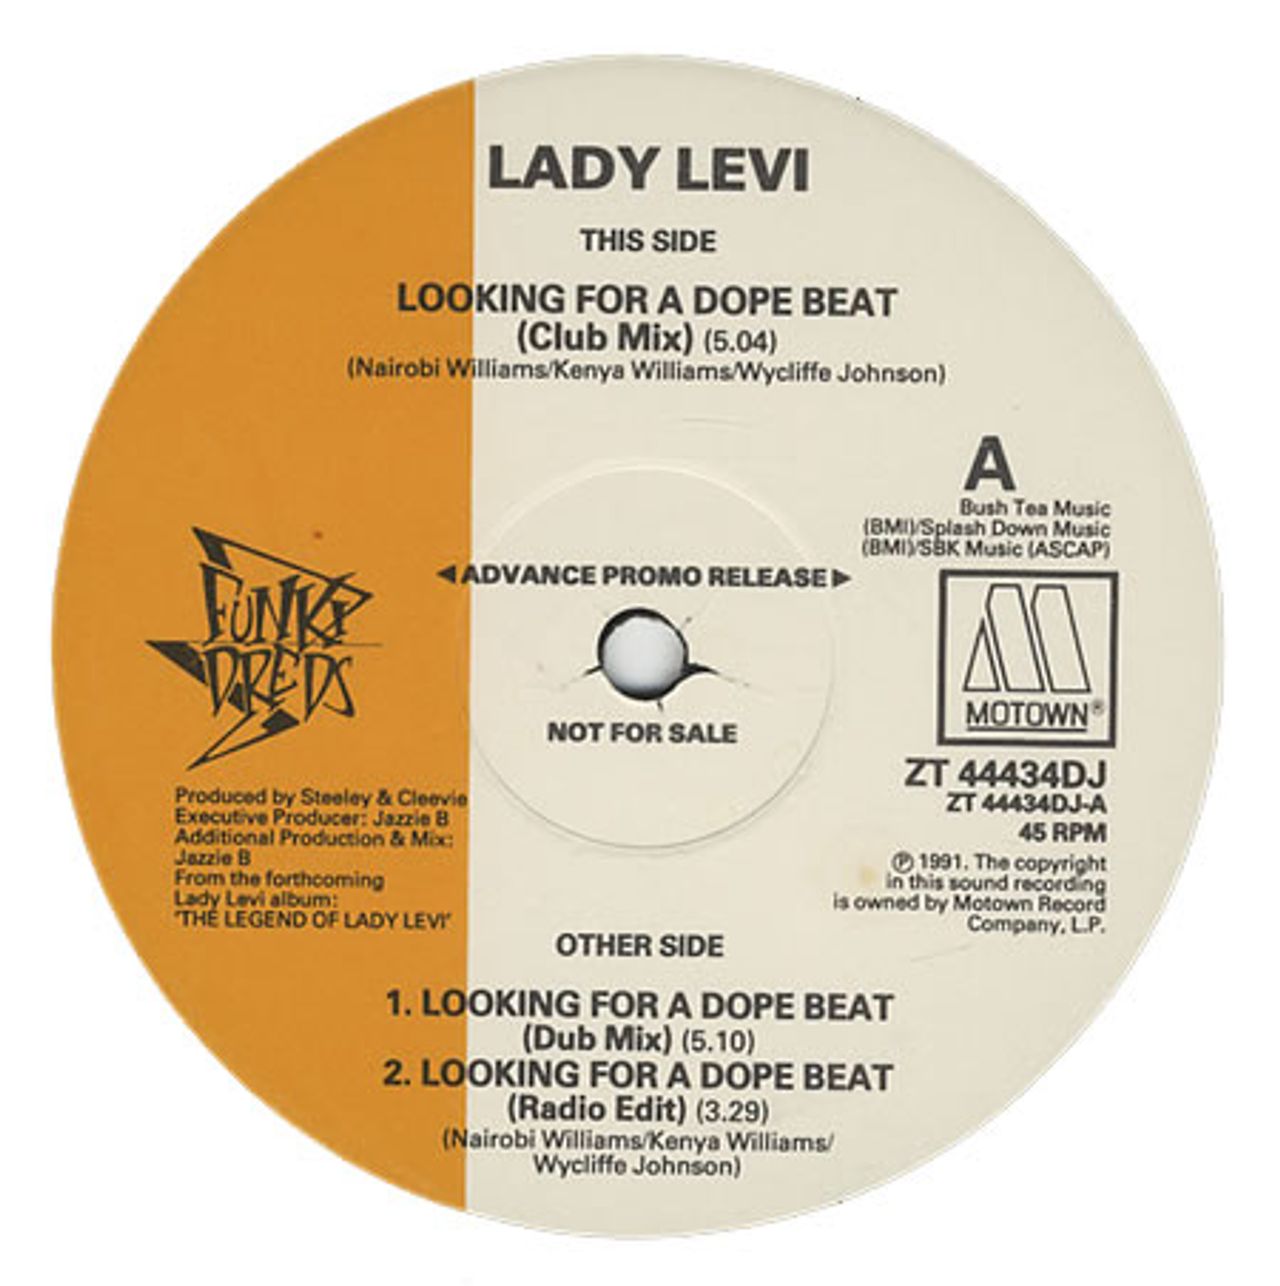 Lady Levi Looking For A Dope Beat UK Promo 12